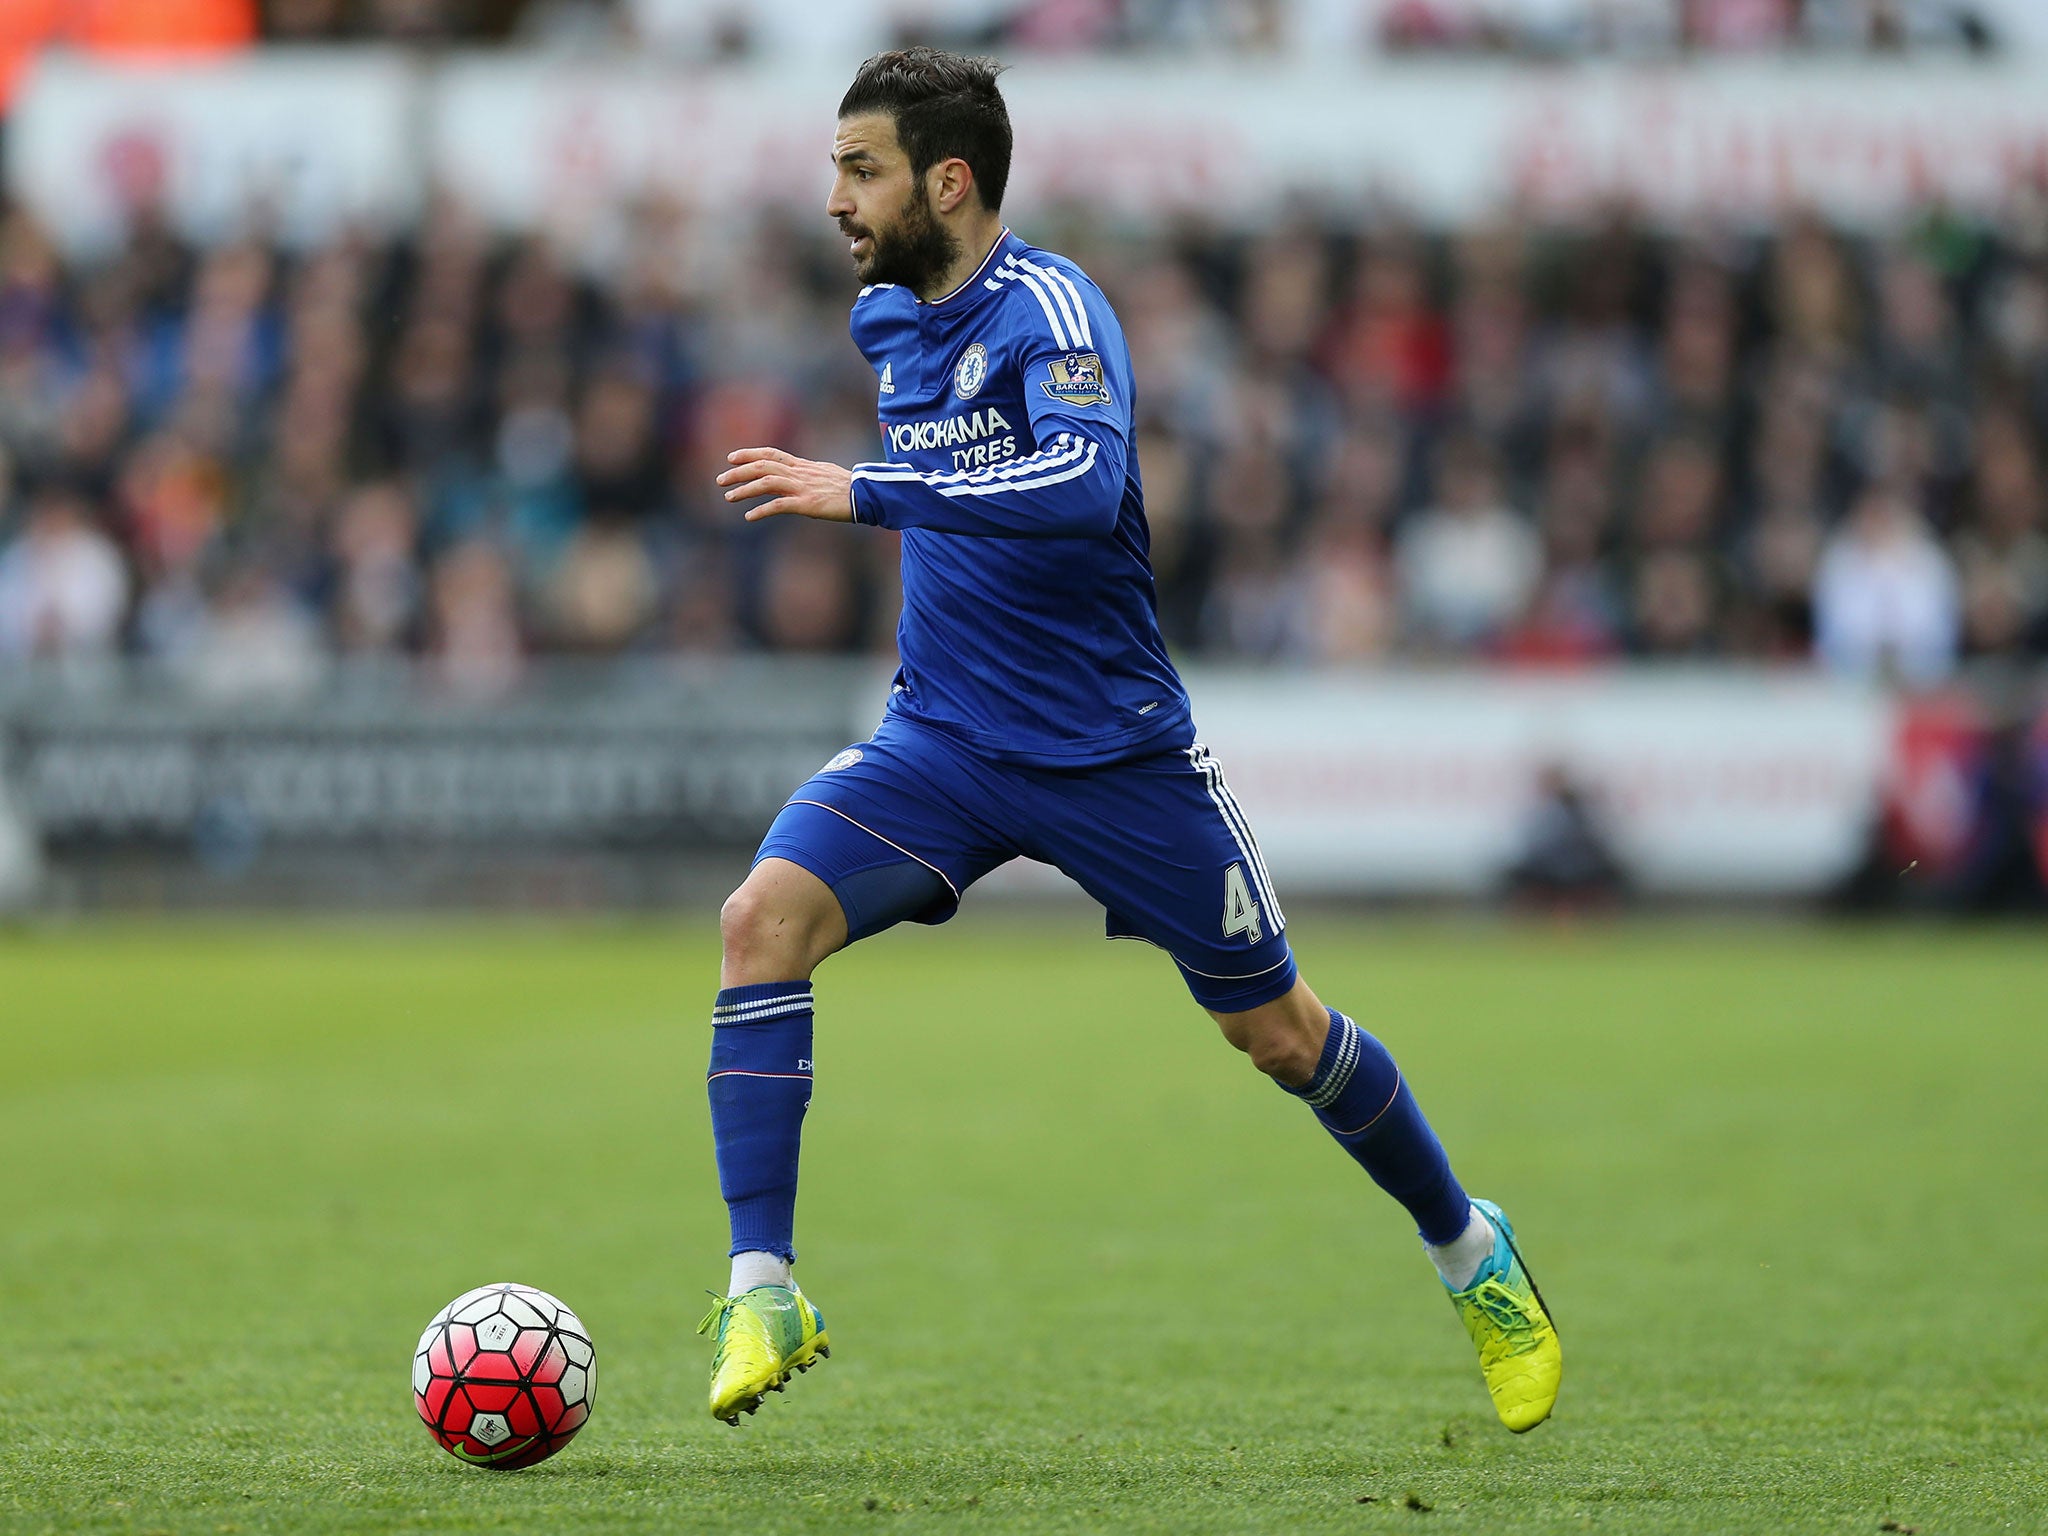 Fabregas' form dipped last season as Chelsea finished 10th in the league